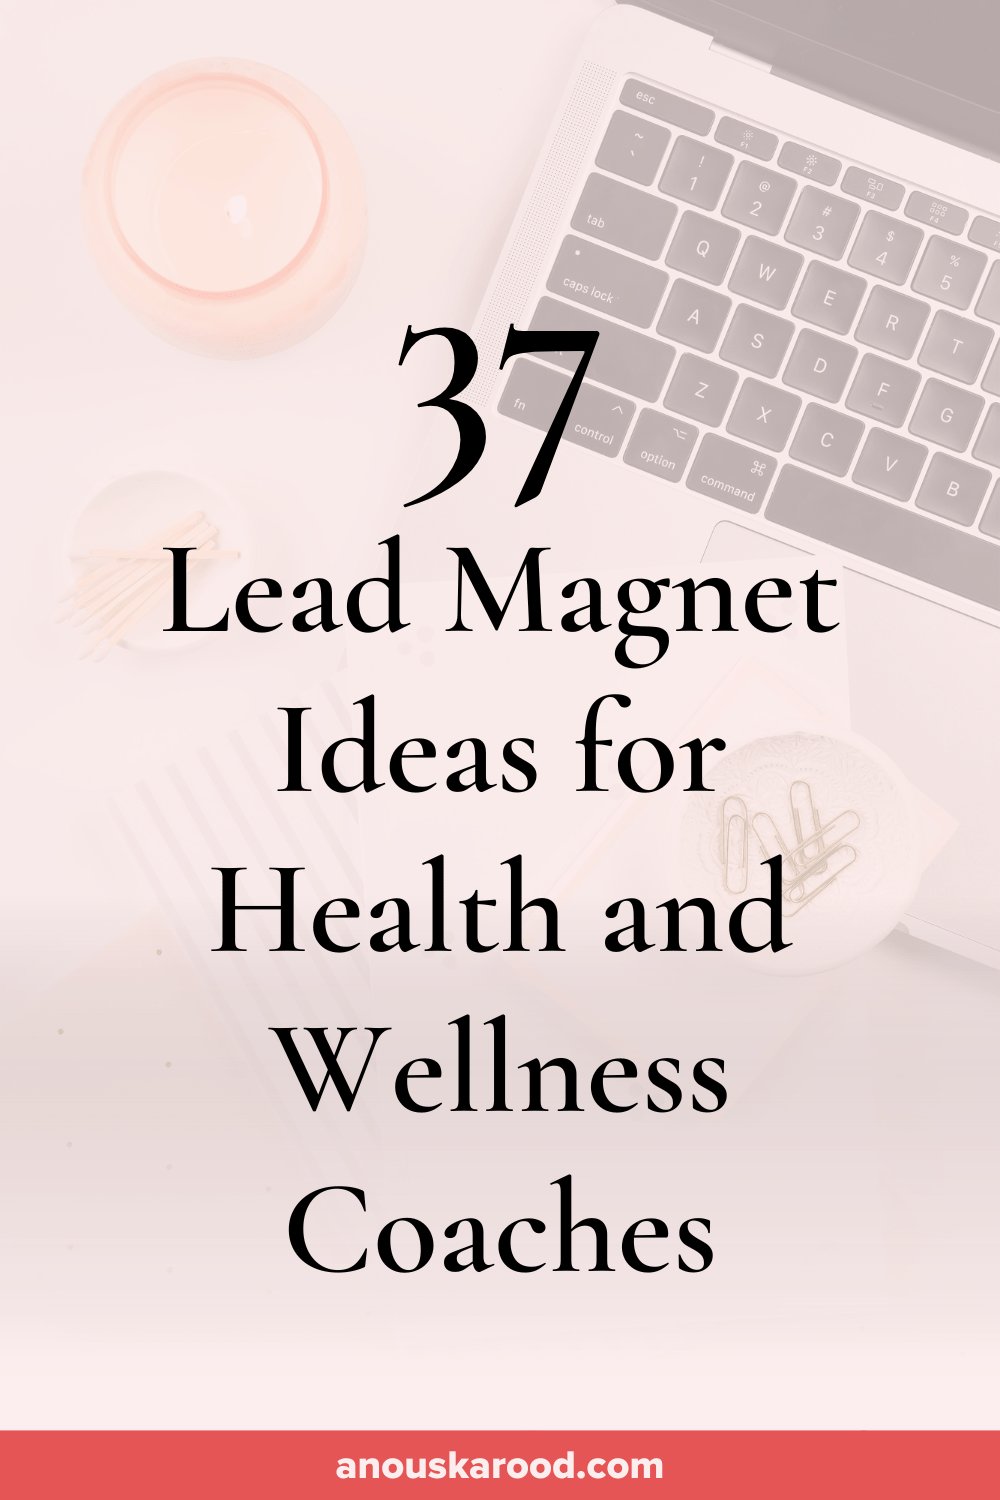 Lead Magnet Ideas for Health and Wellness Coaches